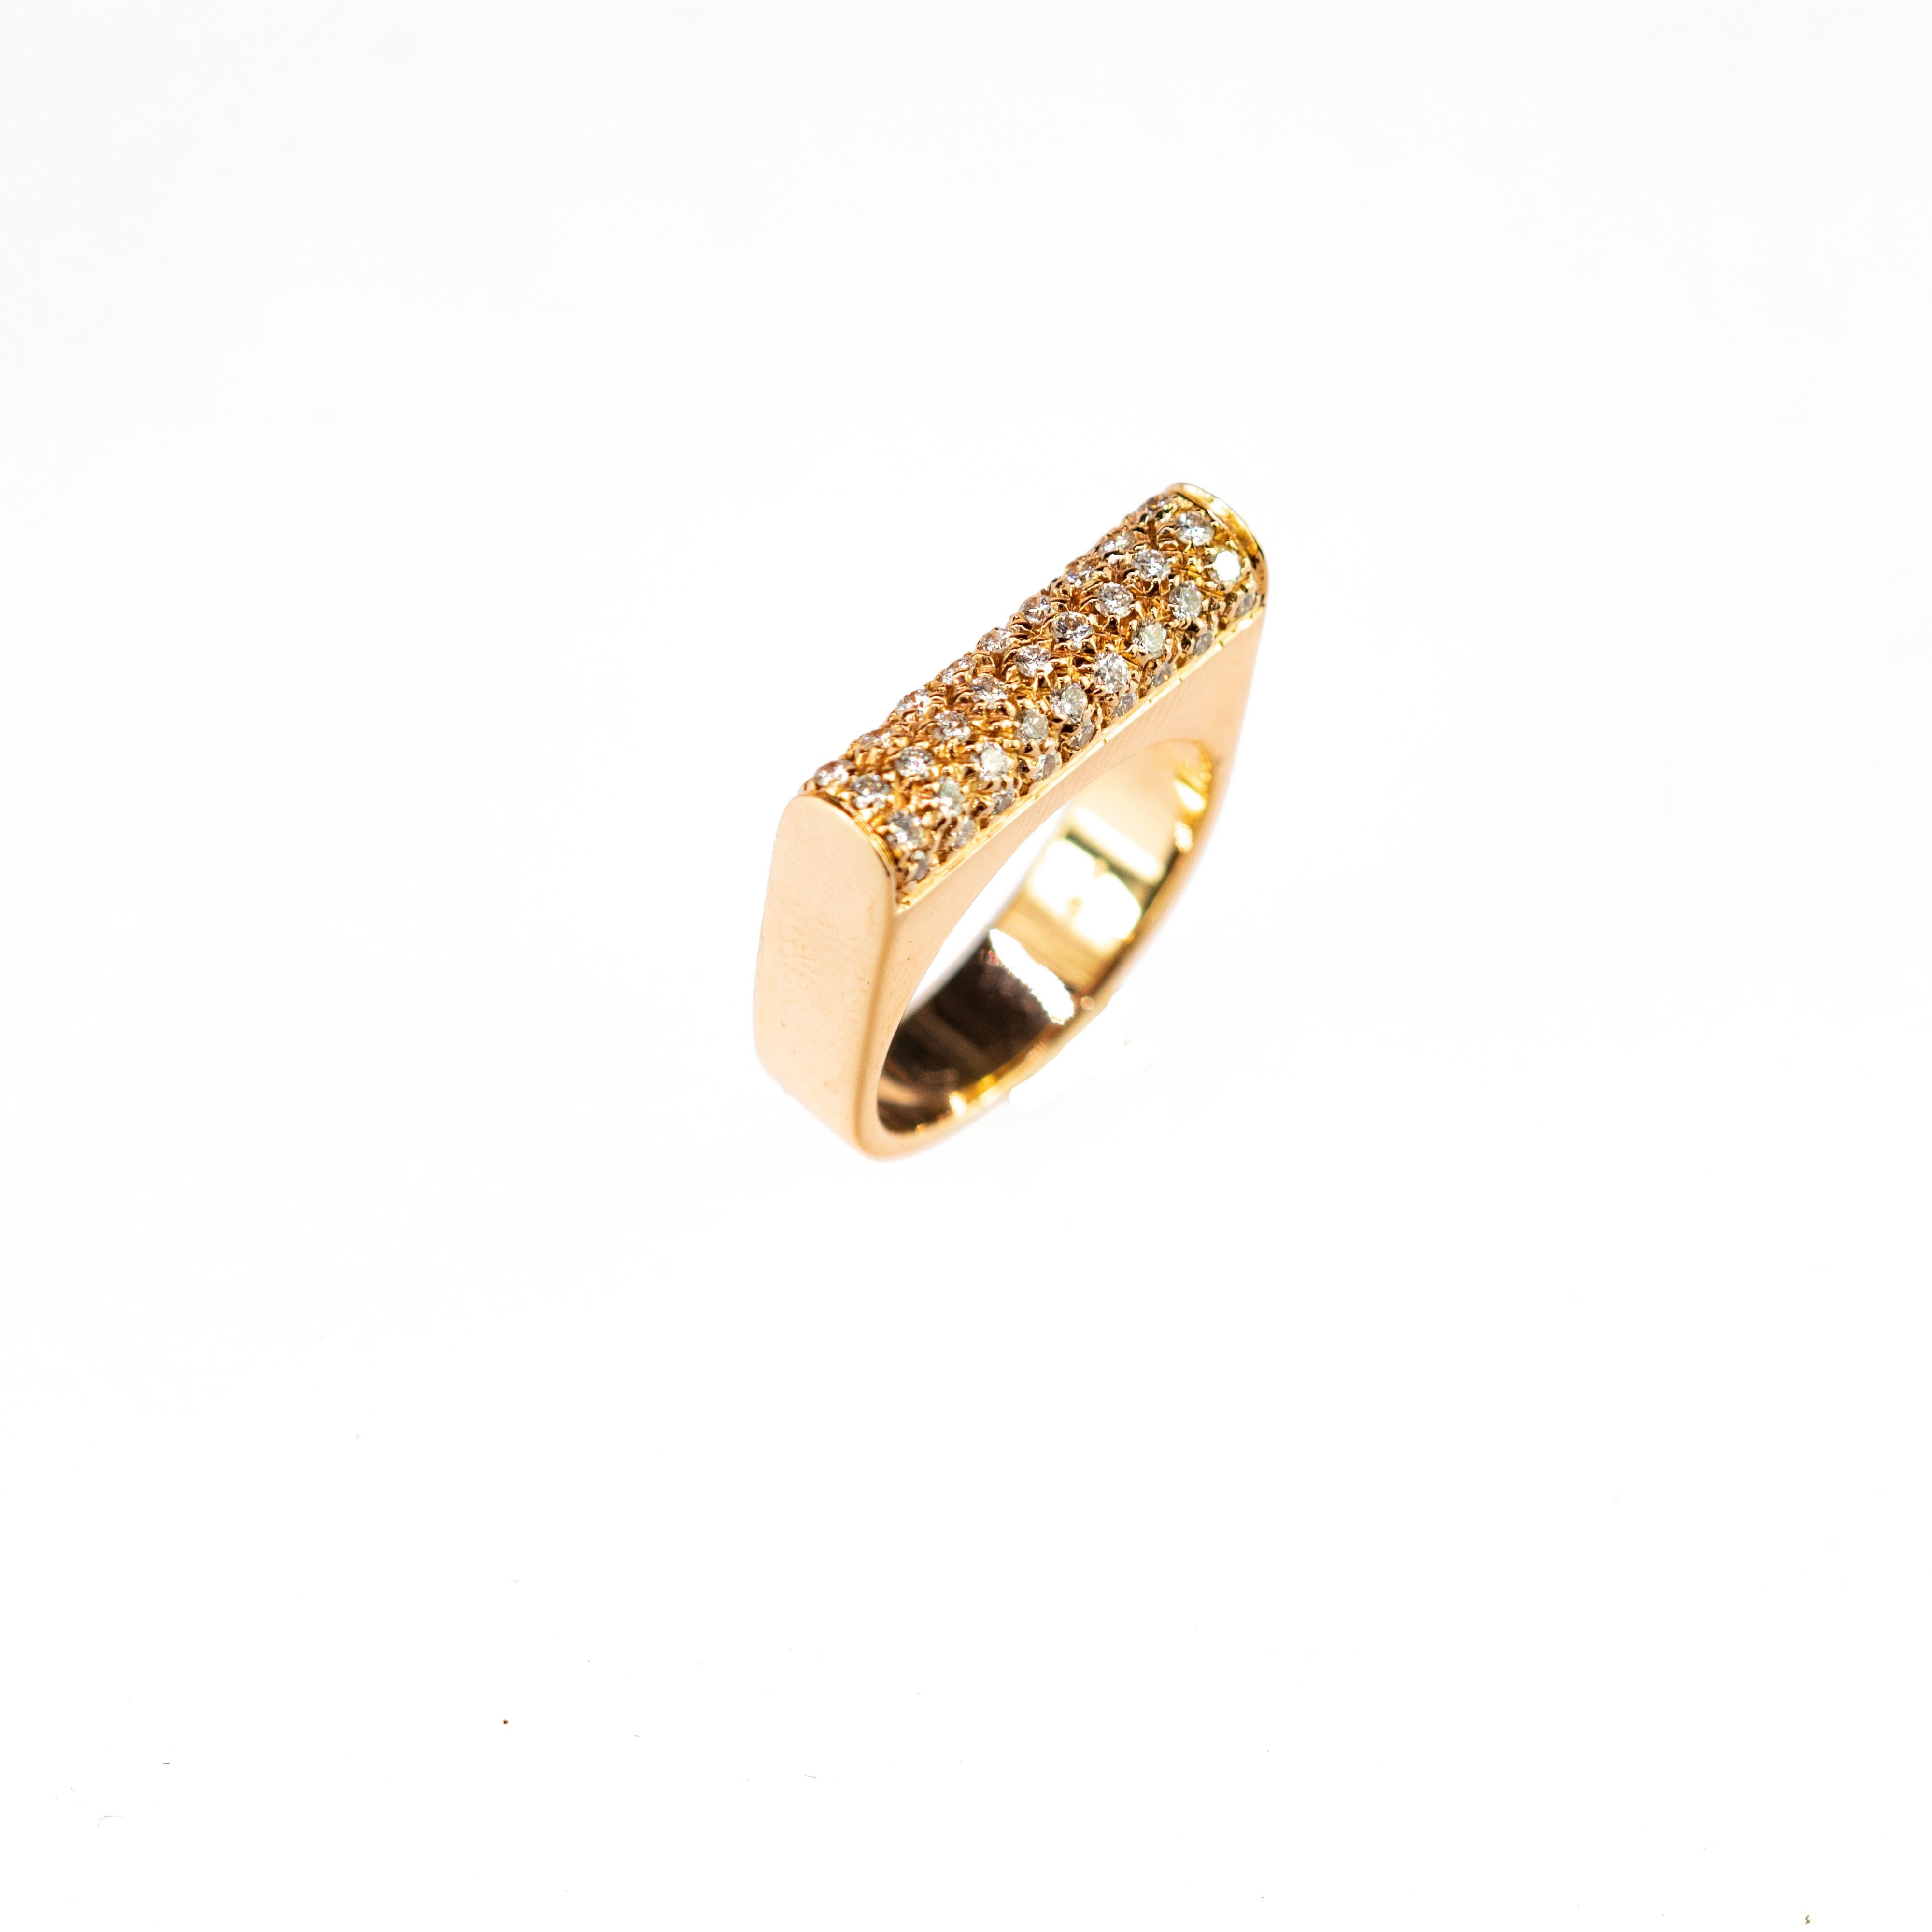 Vintage diamonds cocktail gold ring.

This charming yellow gold ring with gently cut diamonds in a cylindrical shape is seated in a semi square ring. This ring is inspired by the simplicity of glamour and the authenticity that will give any woman an